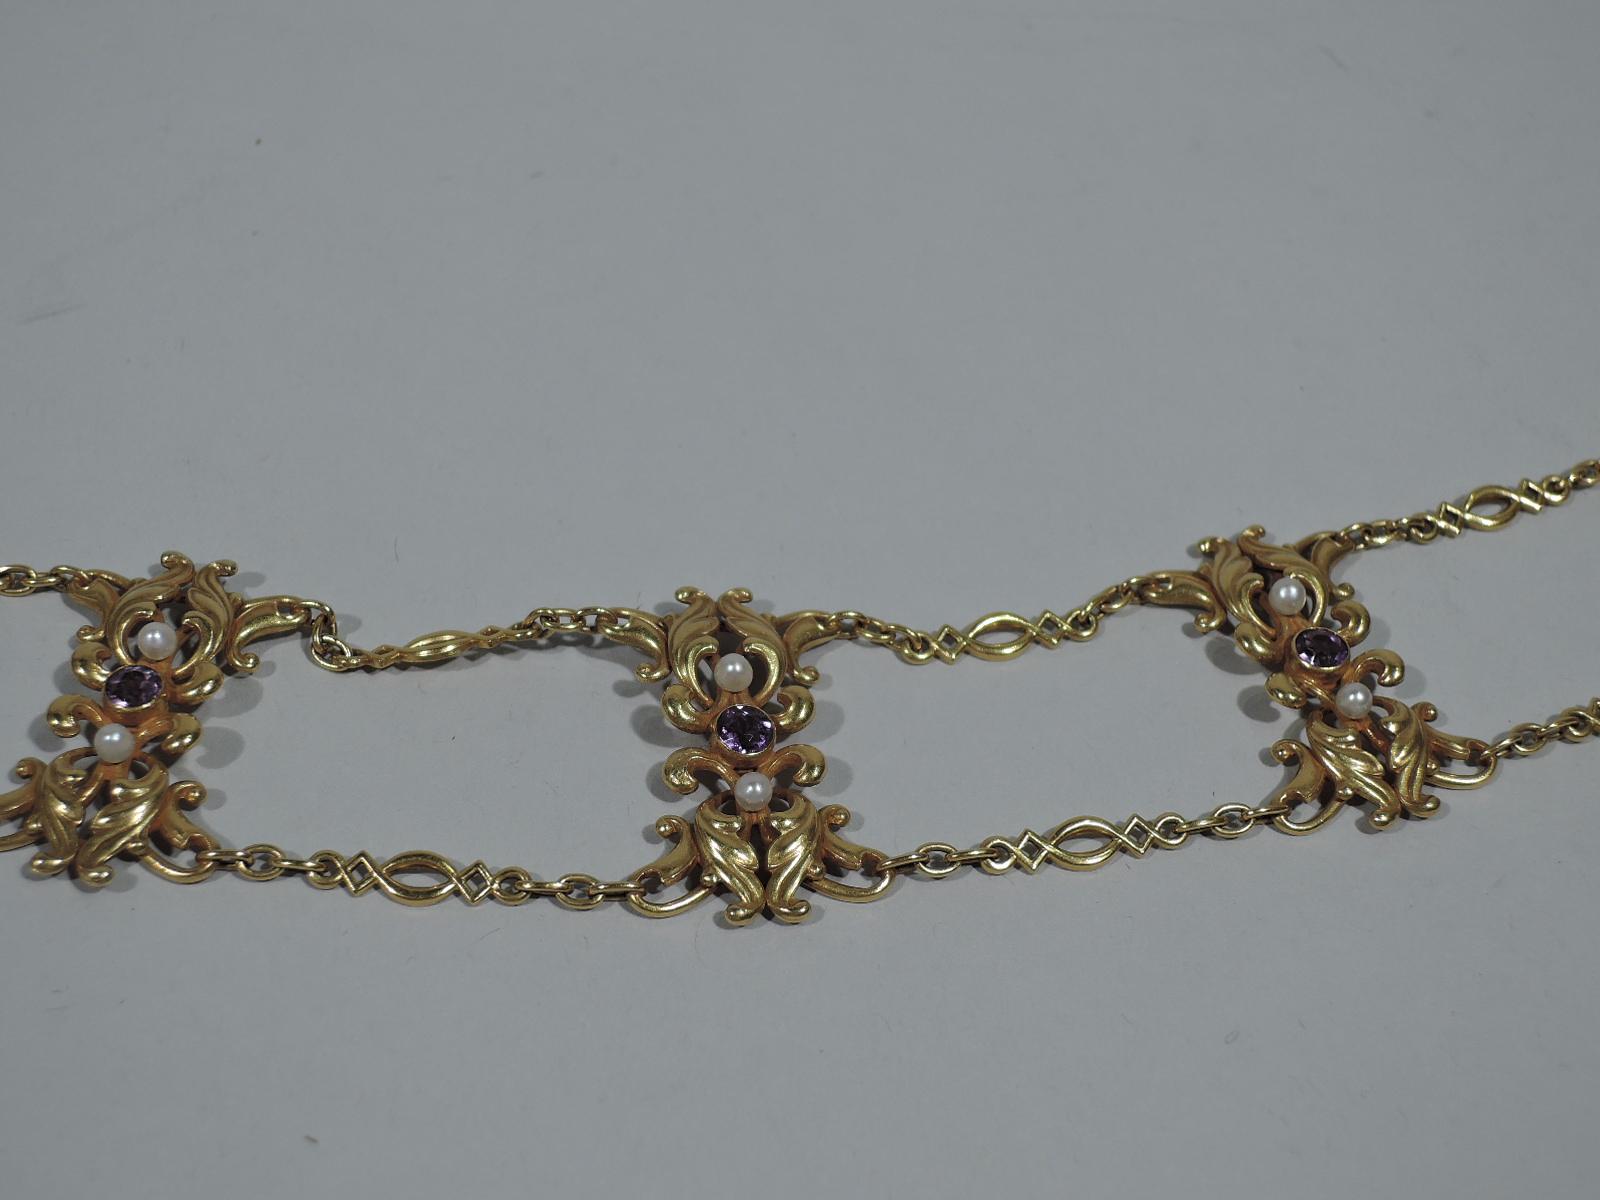 Art Nouveau 14k gold choker with amethysts and pearls. Eight leafy scroll partitions, each applied with two pearls and one amethyst. They are joined at top and bottom by intricate curvilinear chains. United States, ca 1900.